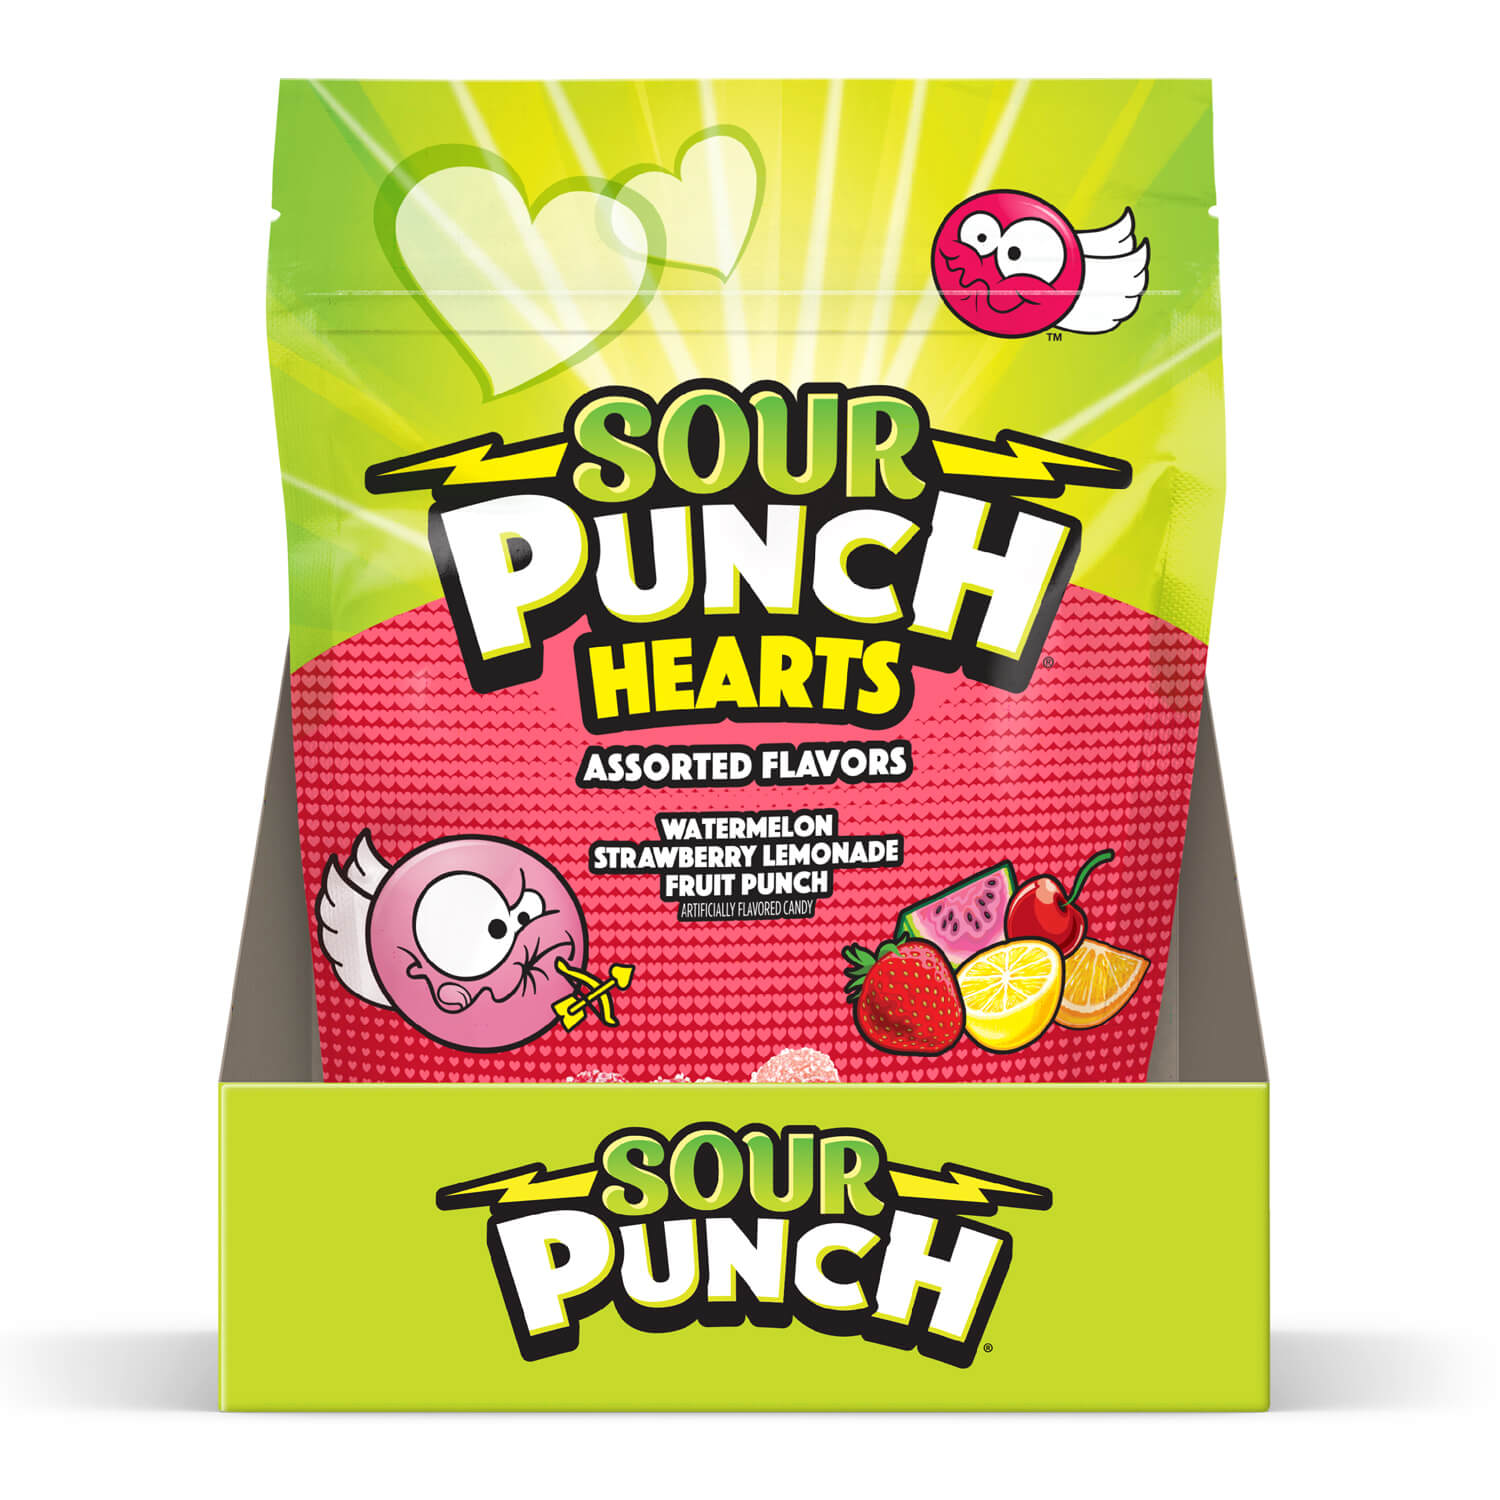 6 count box of SOUR PUNCH Valentine's Day Candy Hearts 8oz Bags